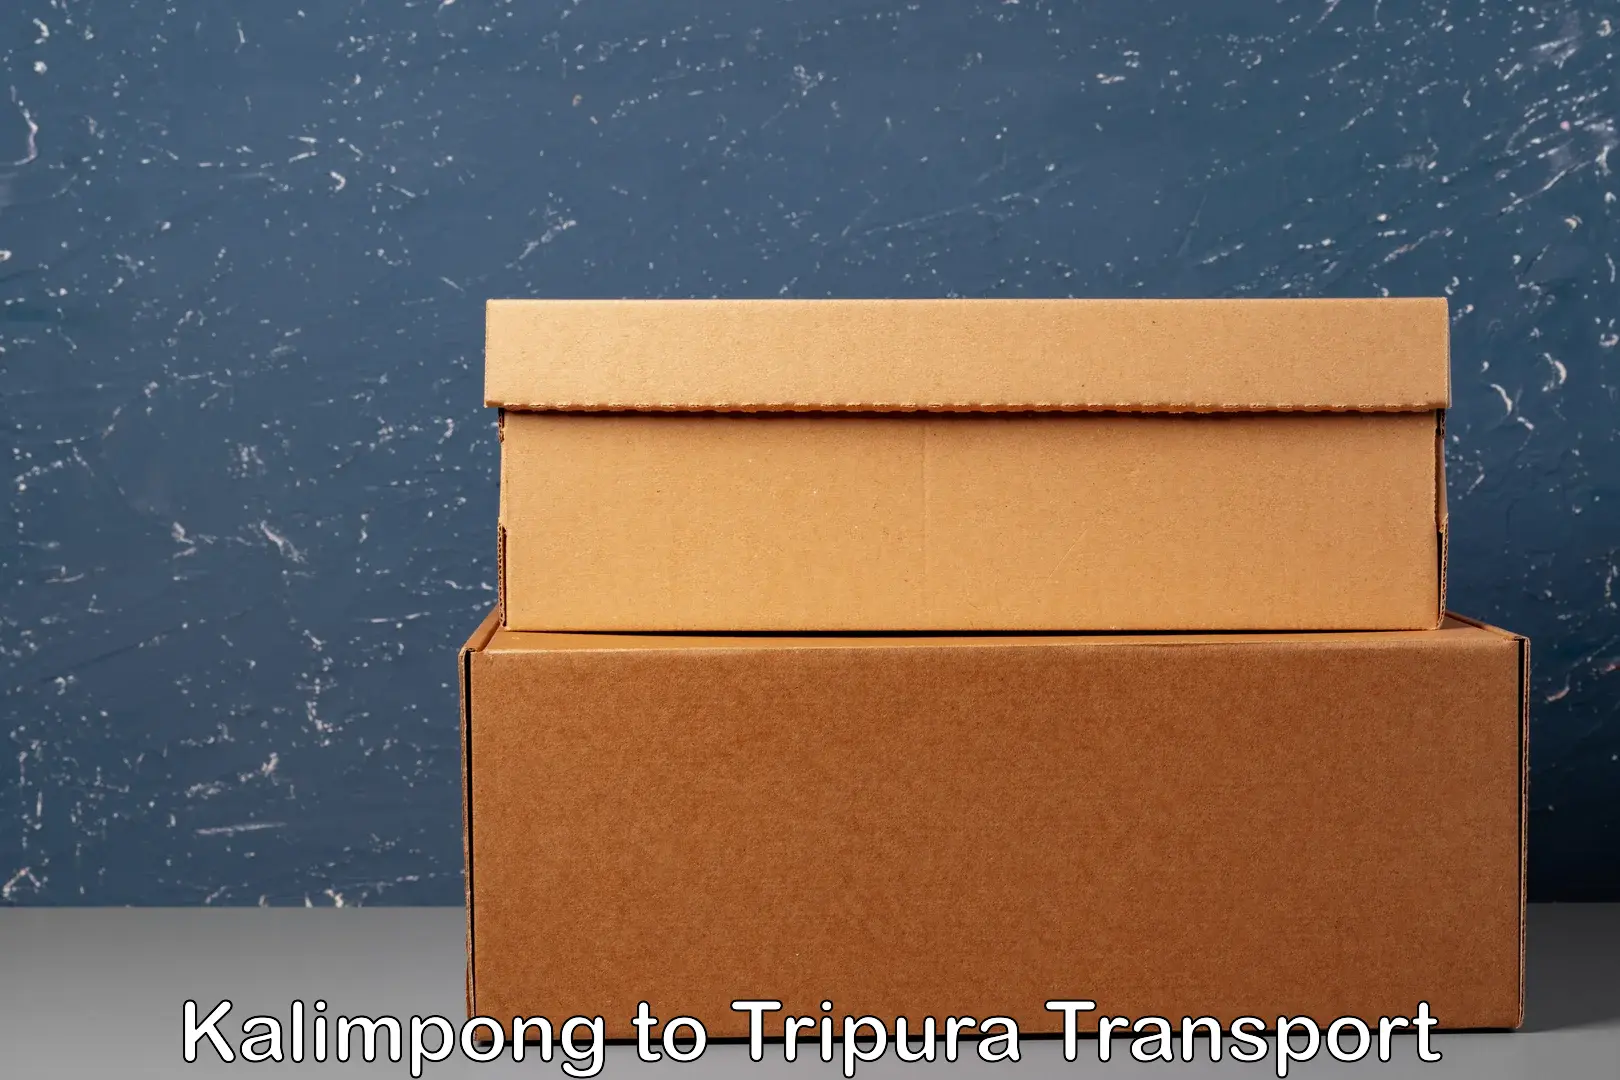 Part load transport service in India Kalimpong to Udaipur Tripura